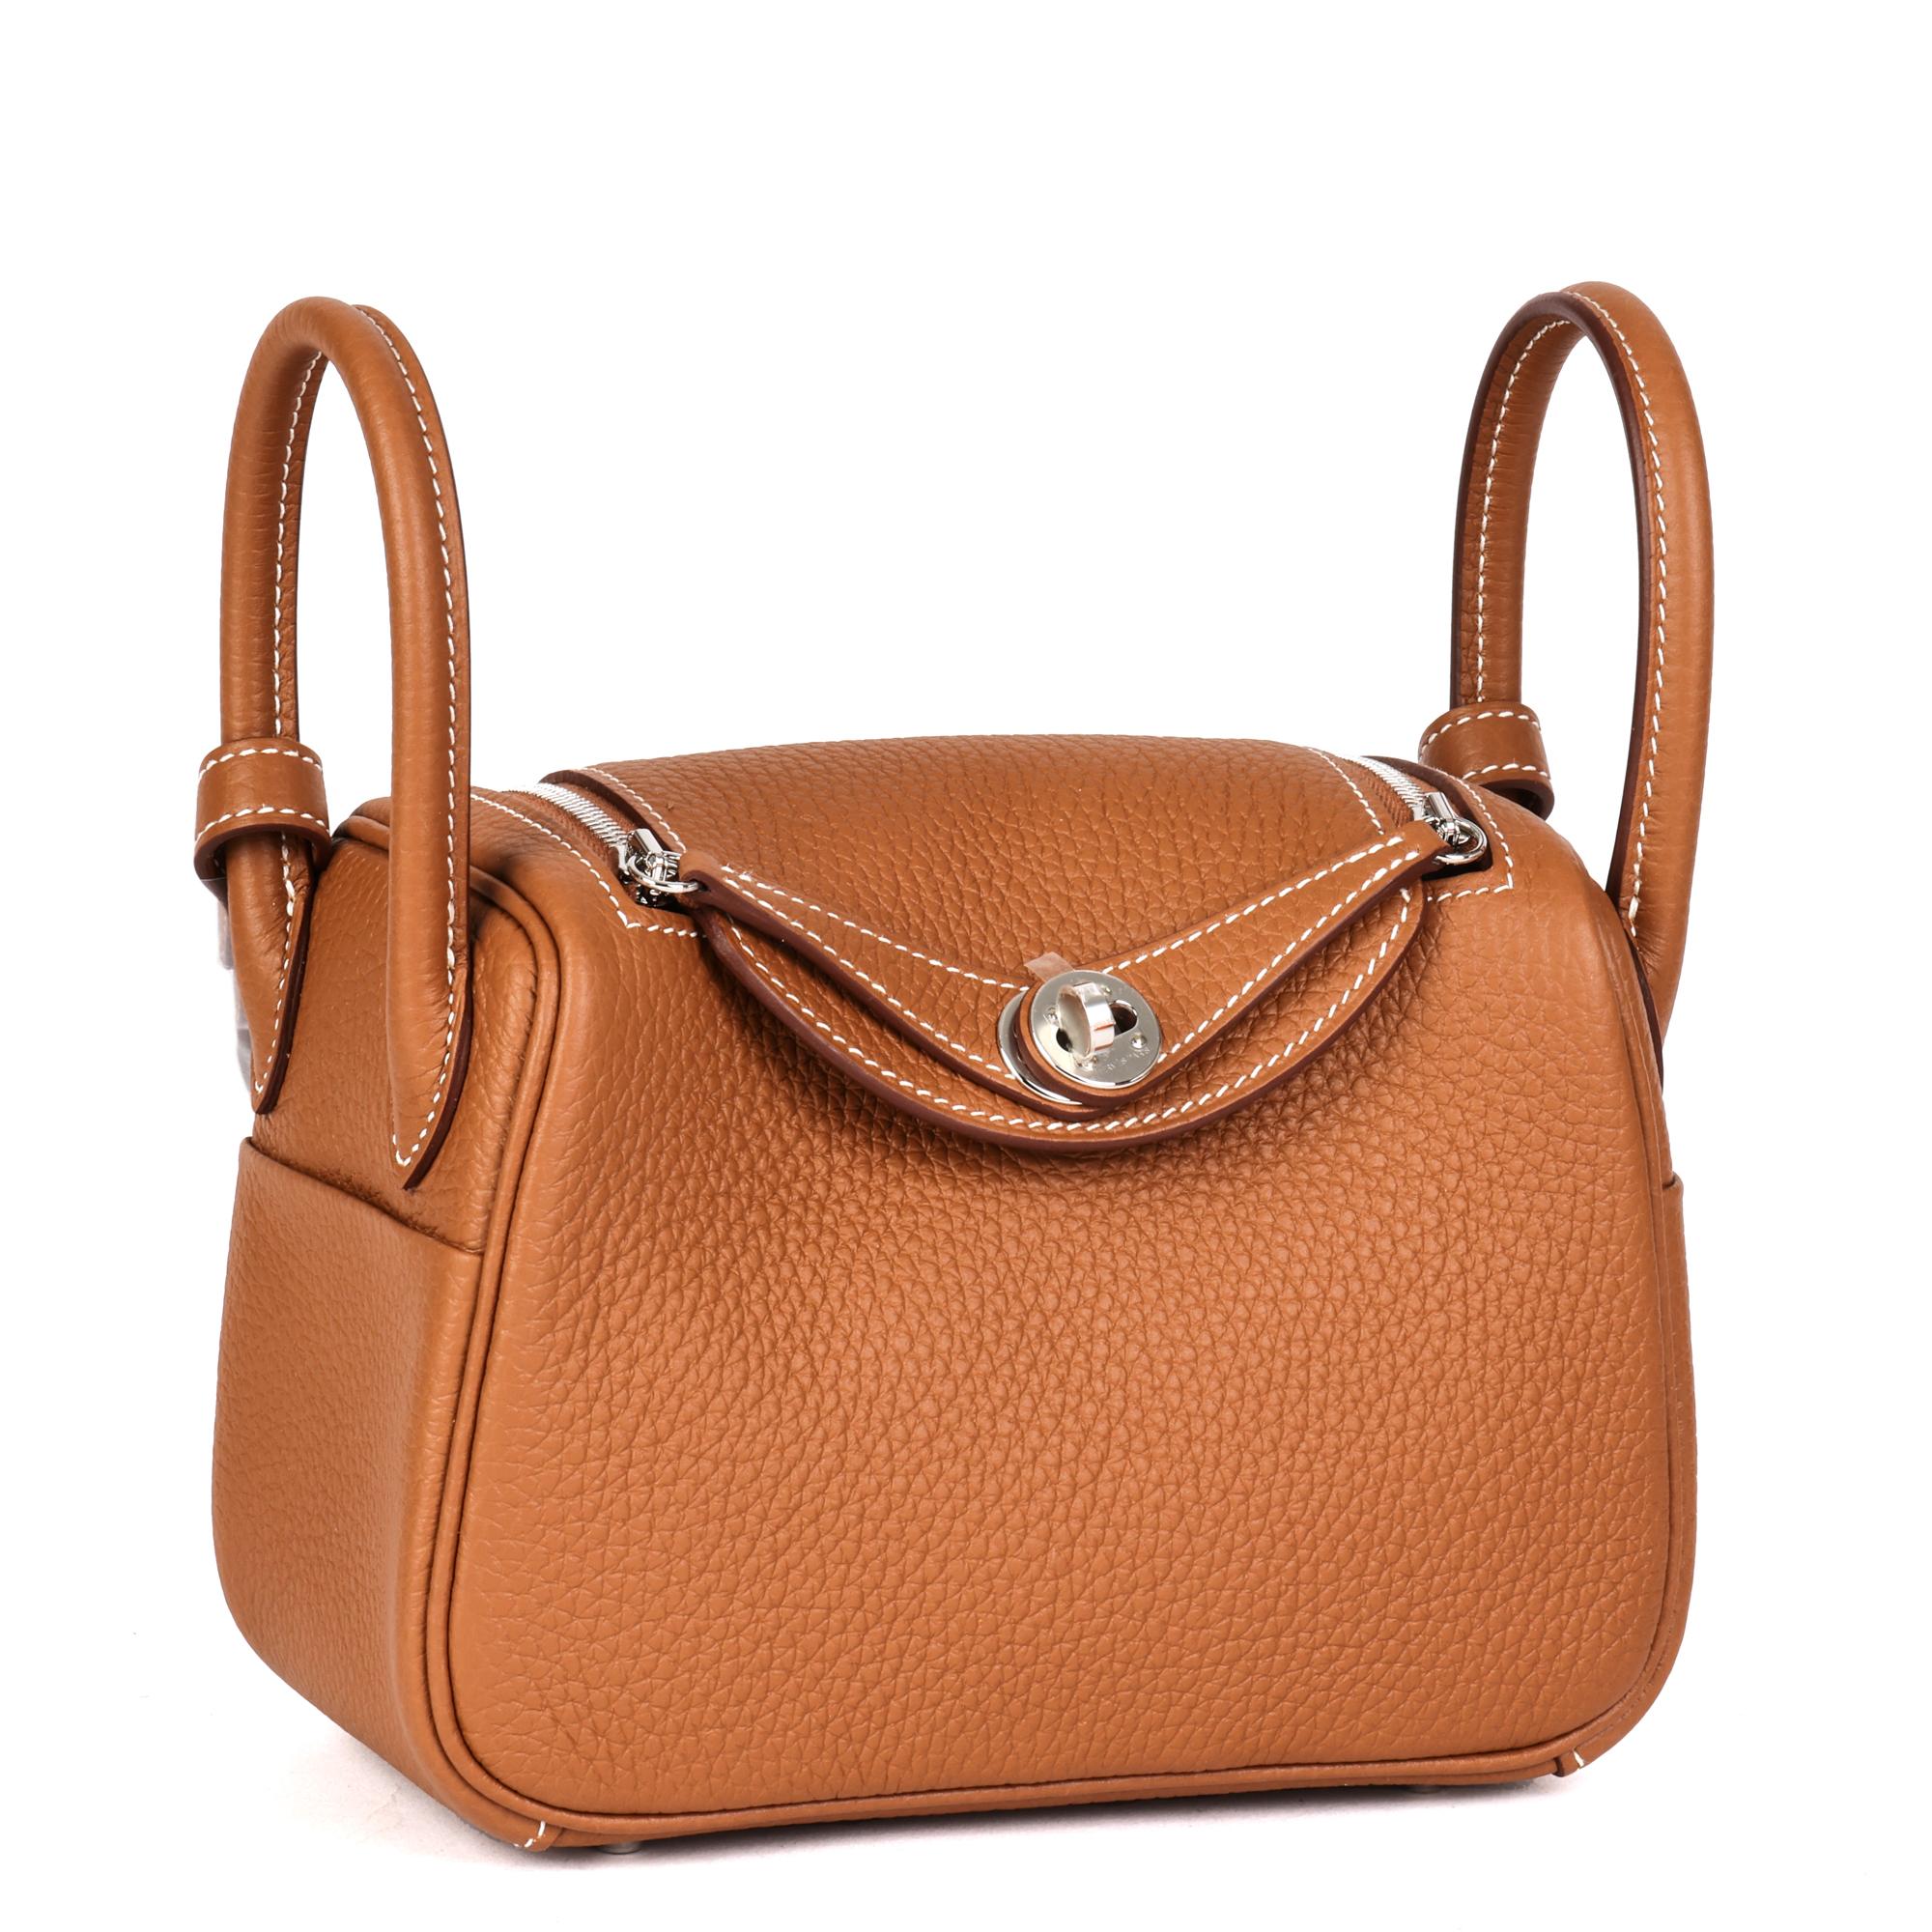 HERMÈS
Gold Clemence Leather Mini Lindy

Xupes Reference: CB663
Serial Number: U
Age (Circa): 2022
Accompanied By: Hermès Dust Bag, Box, Care Booklet, Protective Felt, Invoice
Authenticity Details: Date Stamp (Made in France)
Gender: Ladies
Type: